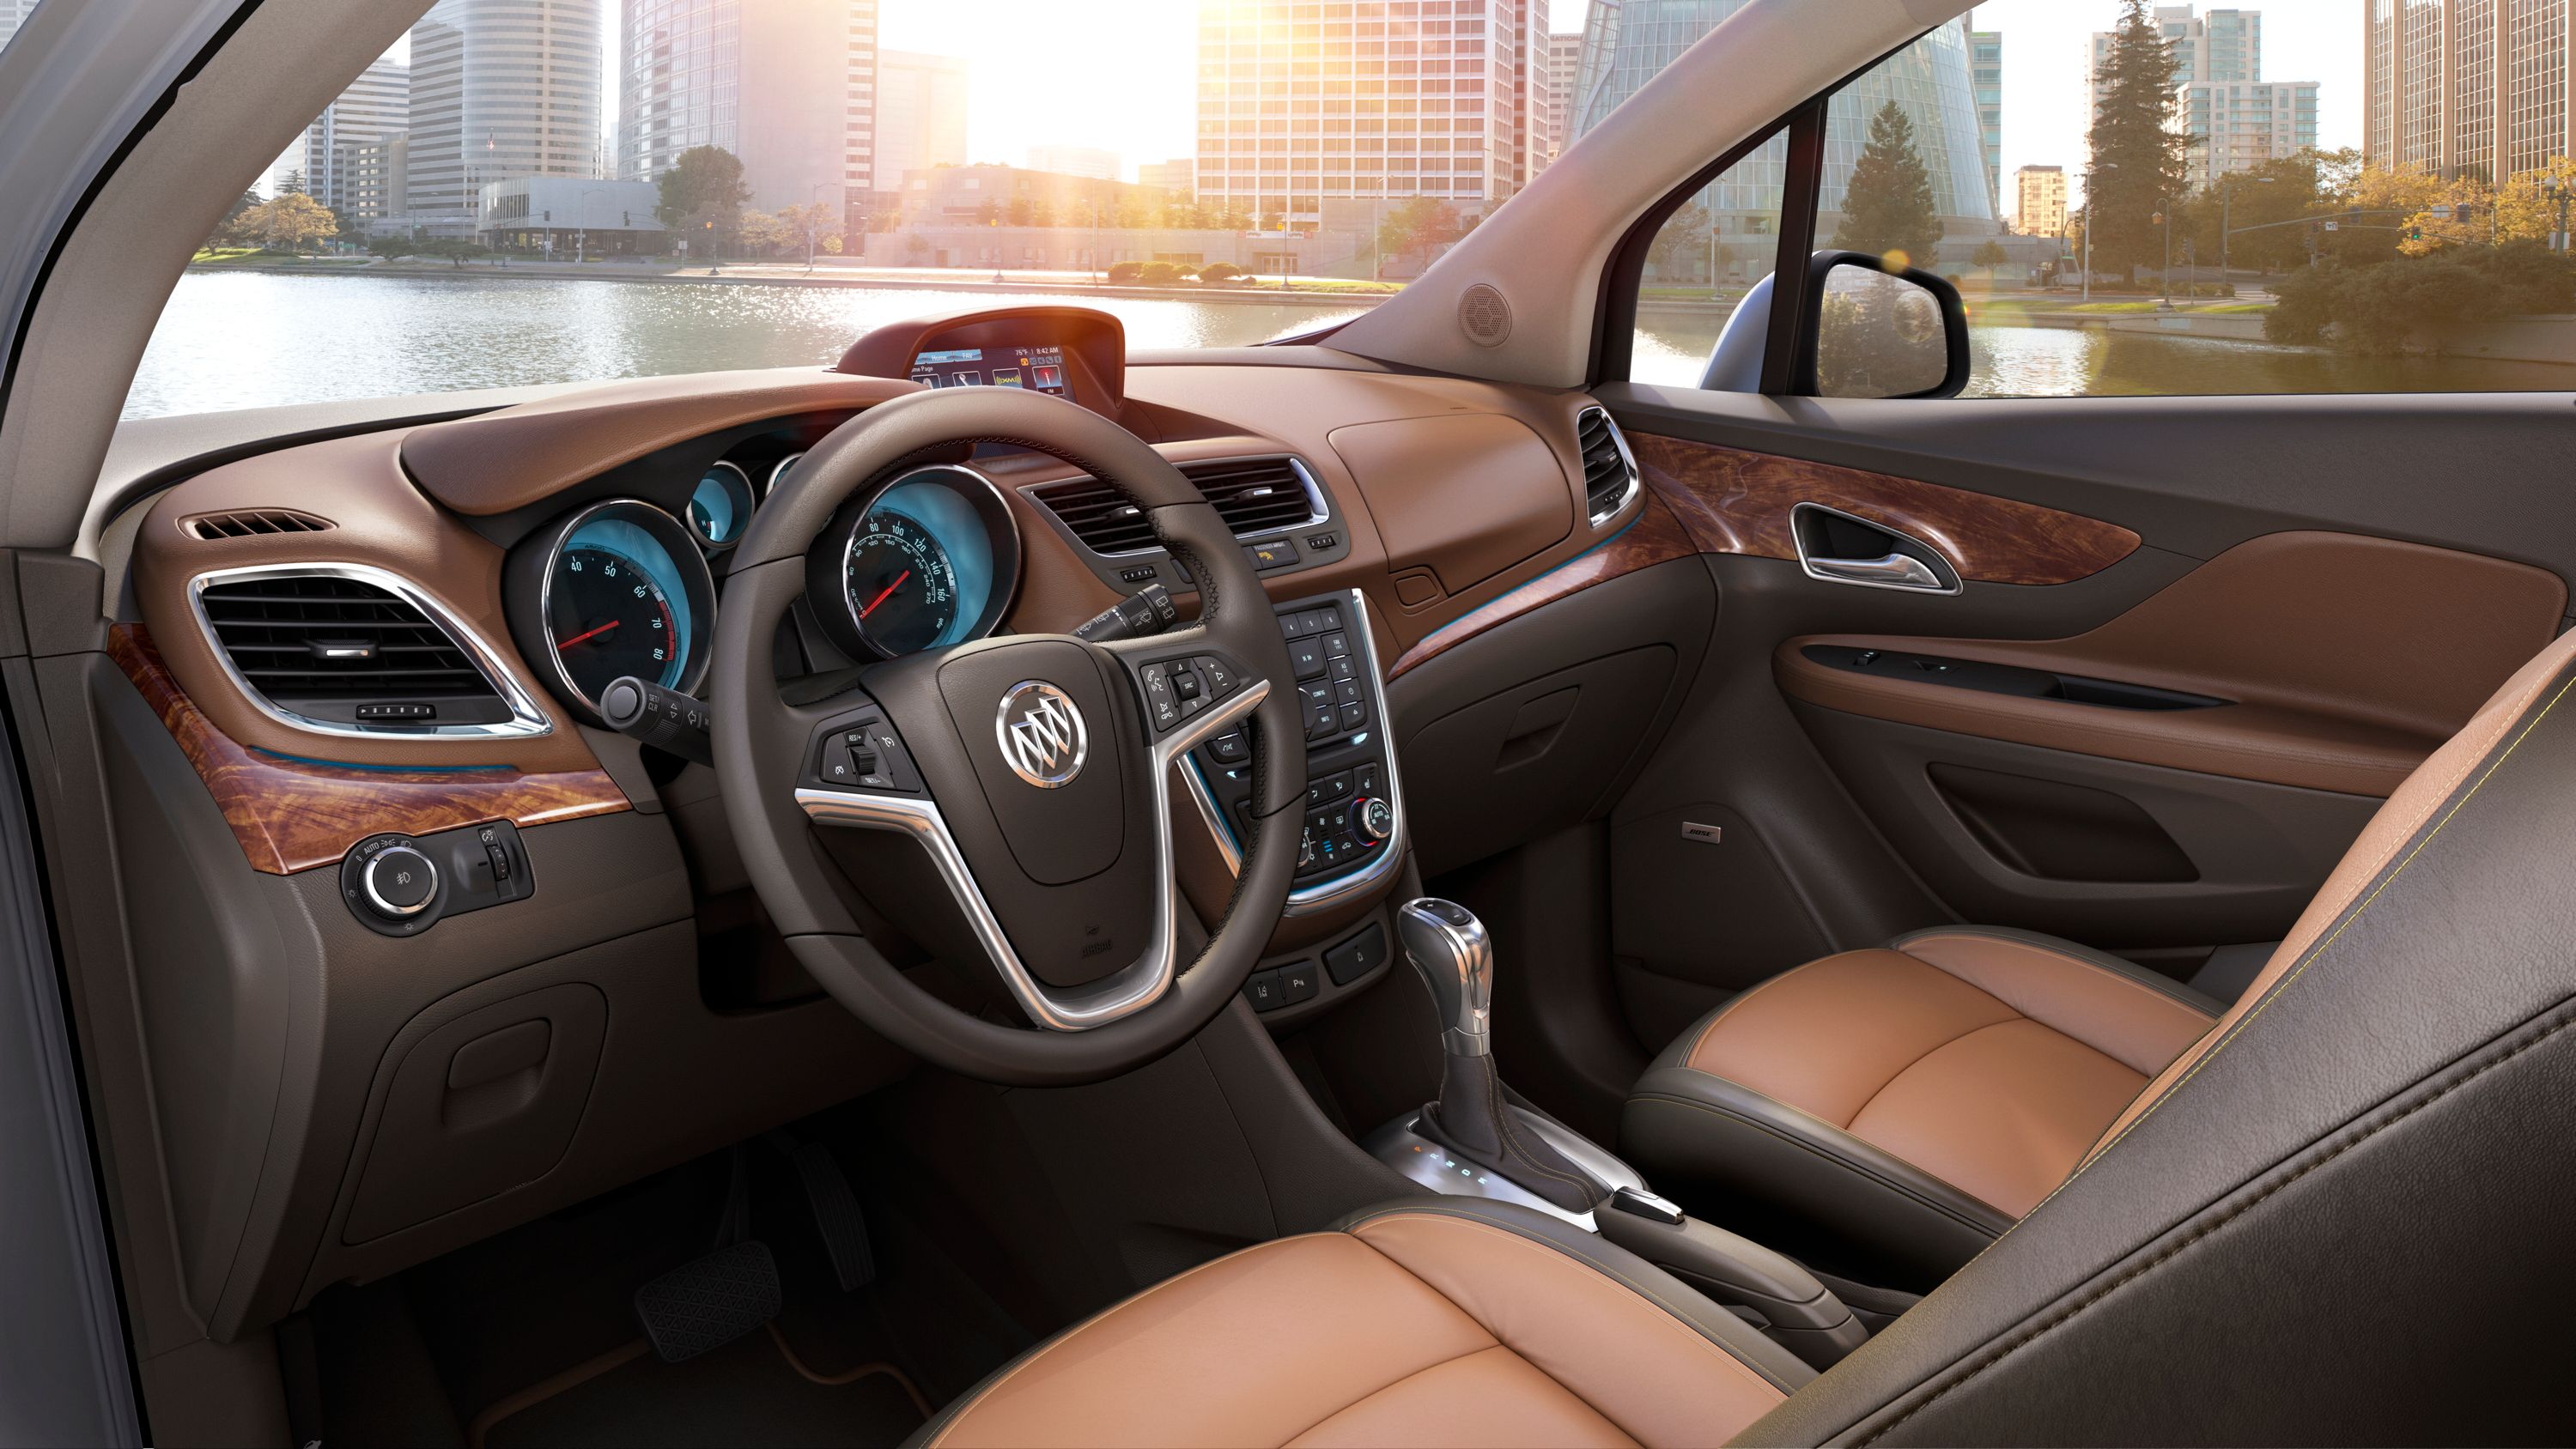 The interior of the 2013 Buick Encore.